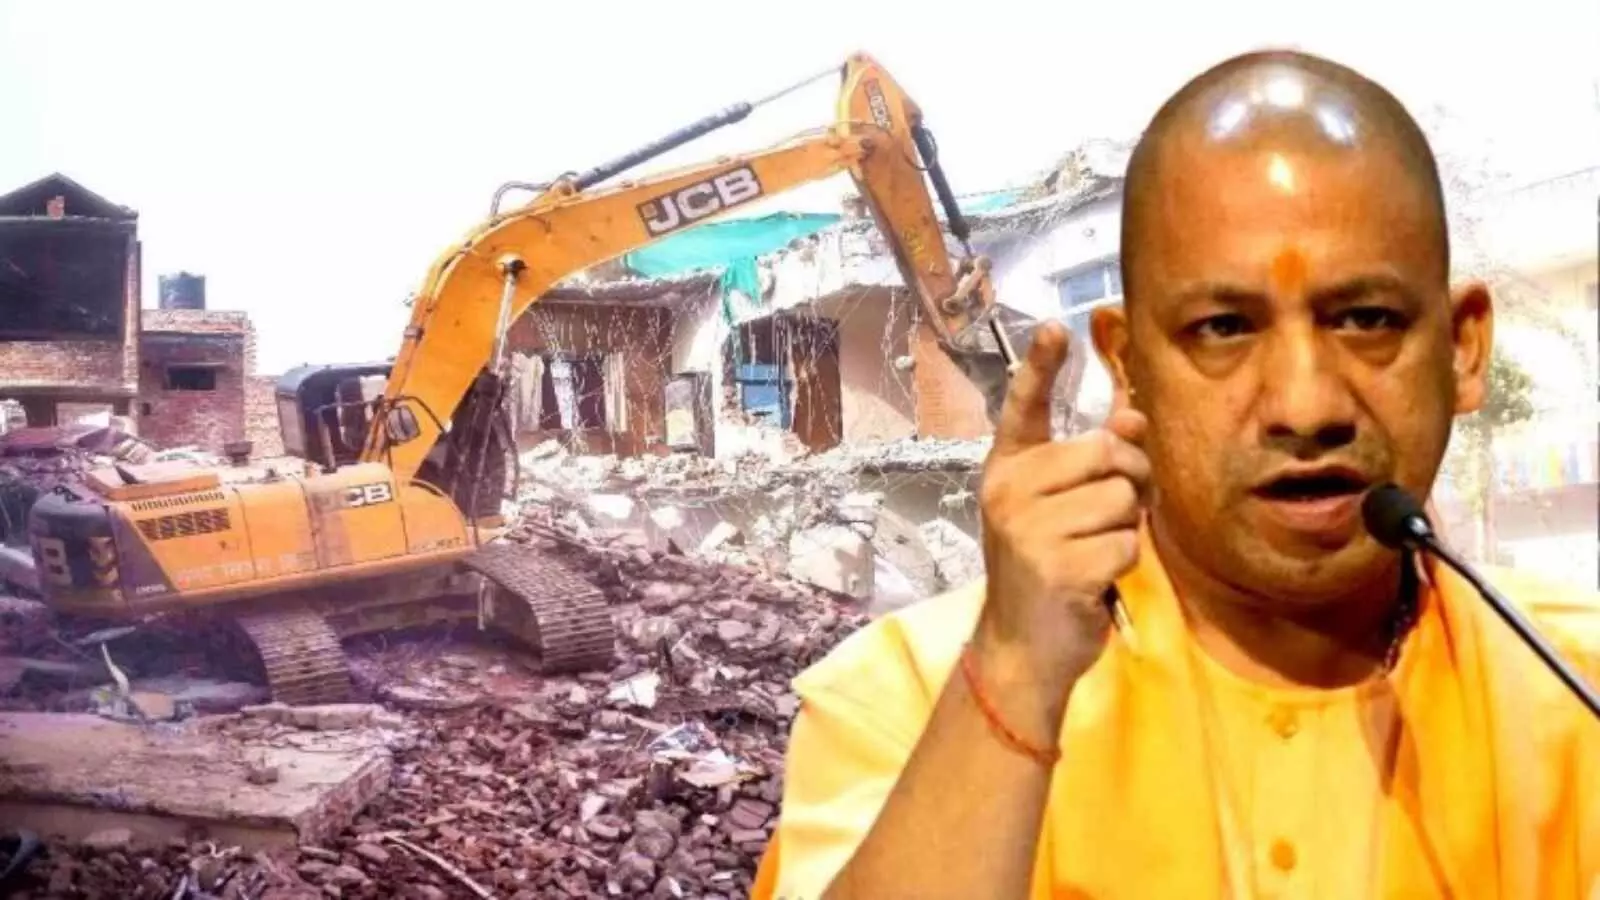 big crackdown illegal properties of mafias worth inr 2524 crore seized in up by yogi government